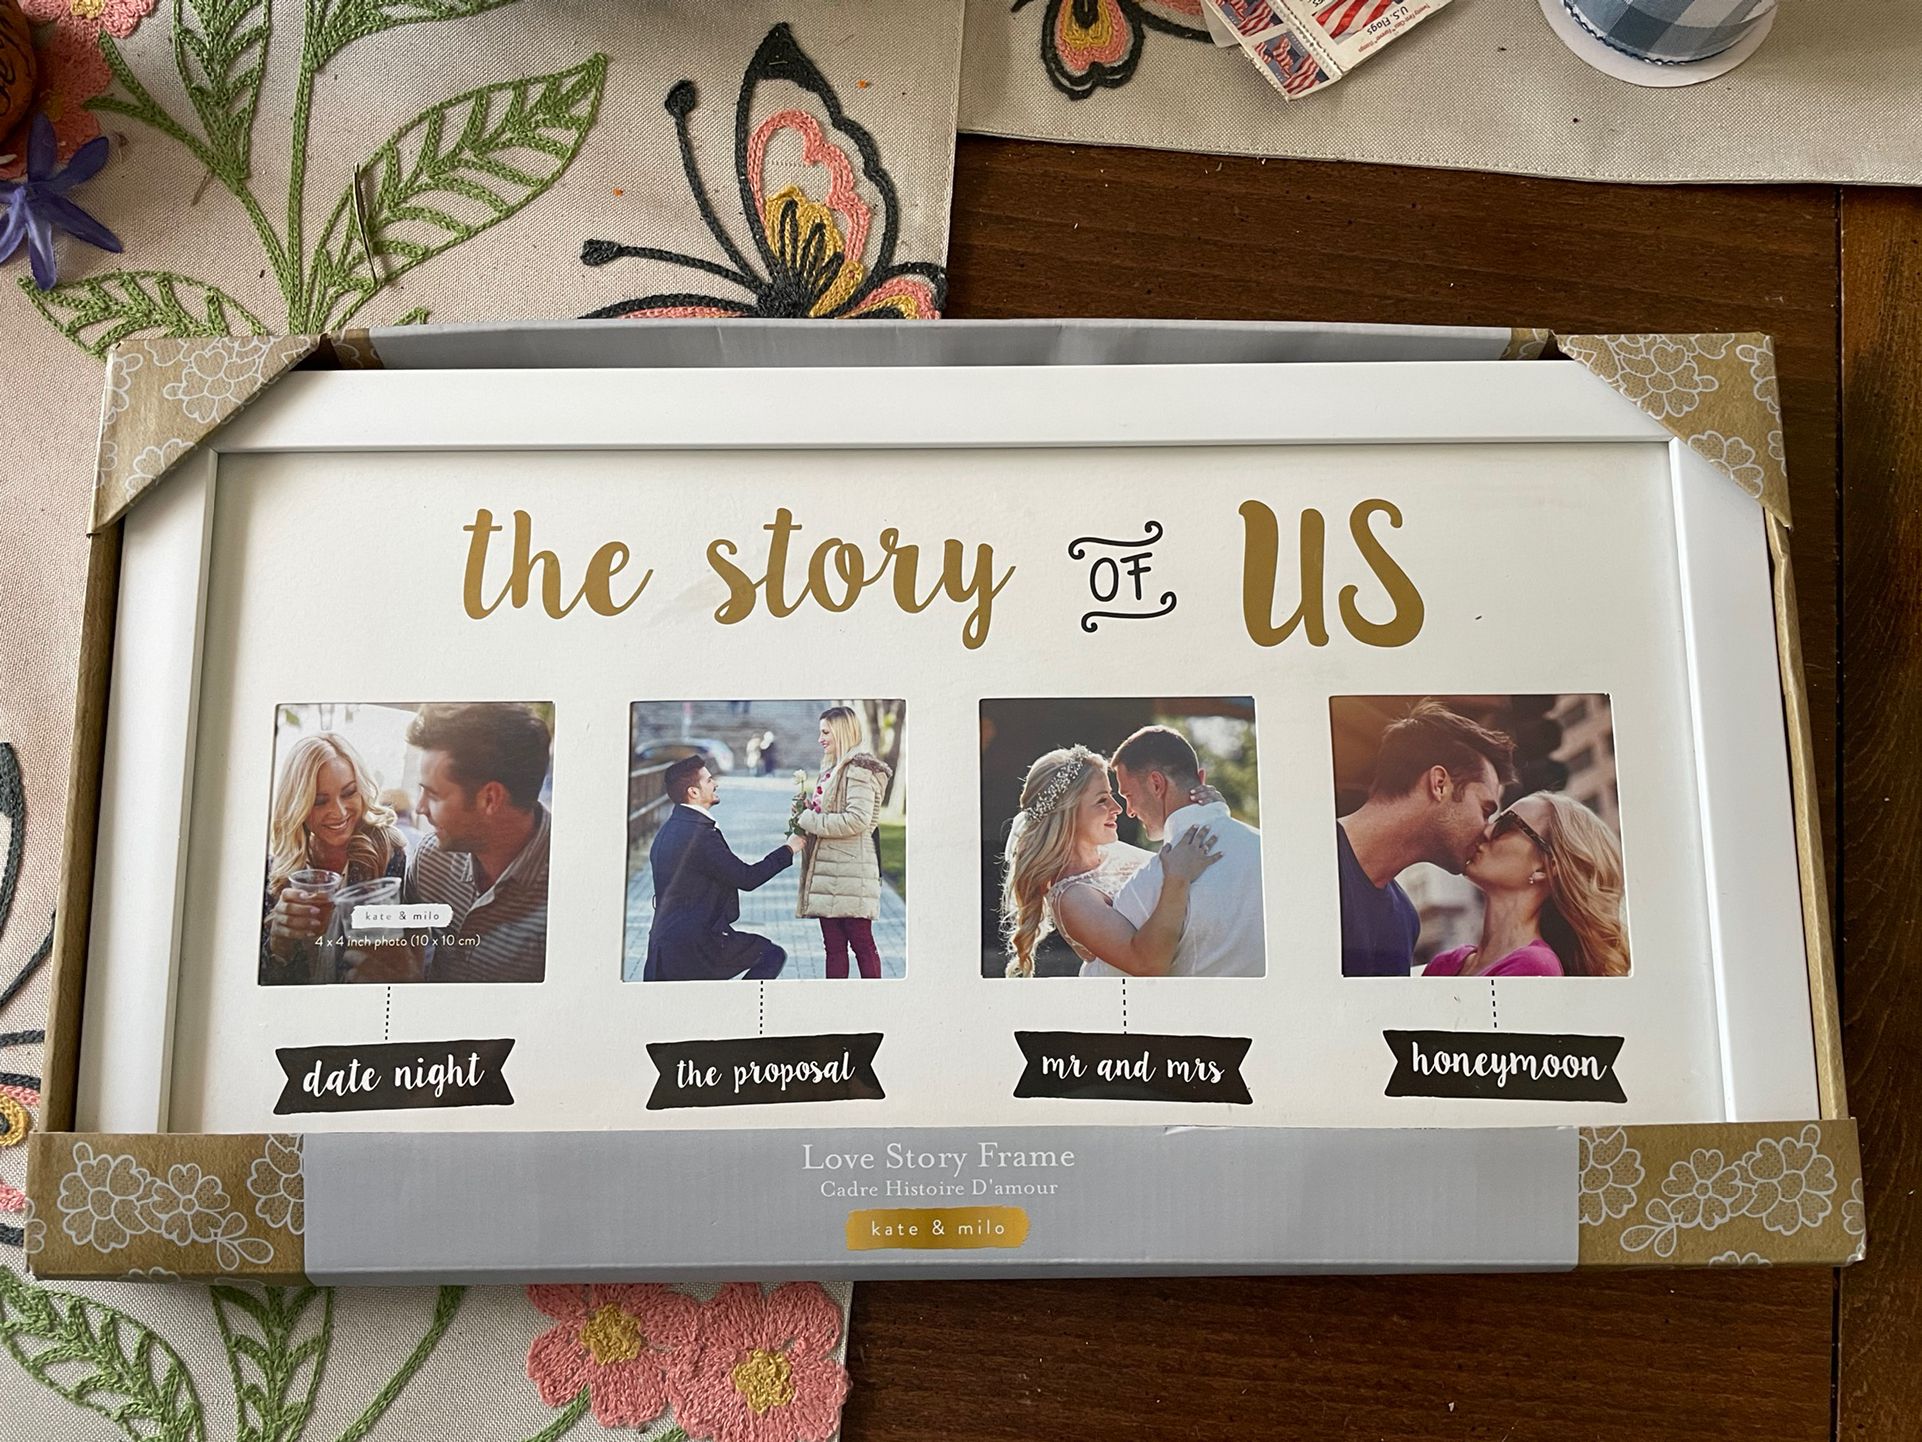 “The Story of Us” Love Story Frame